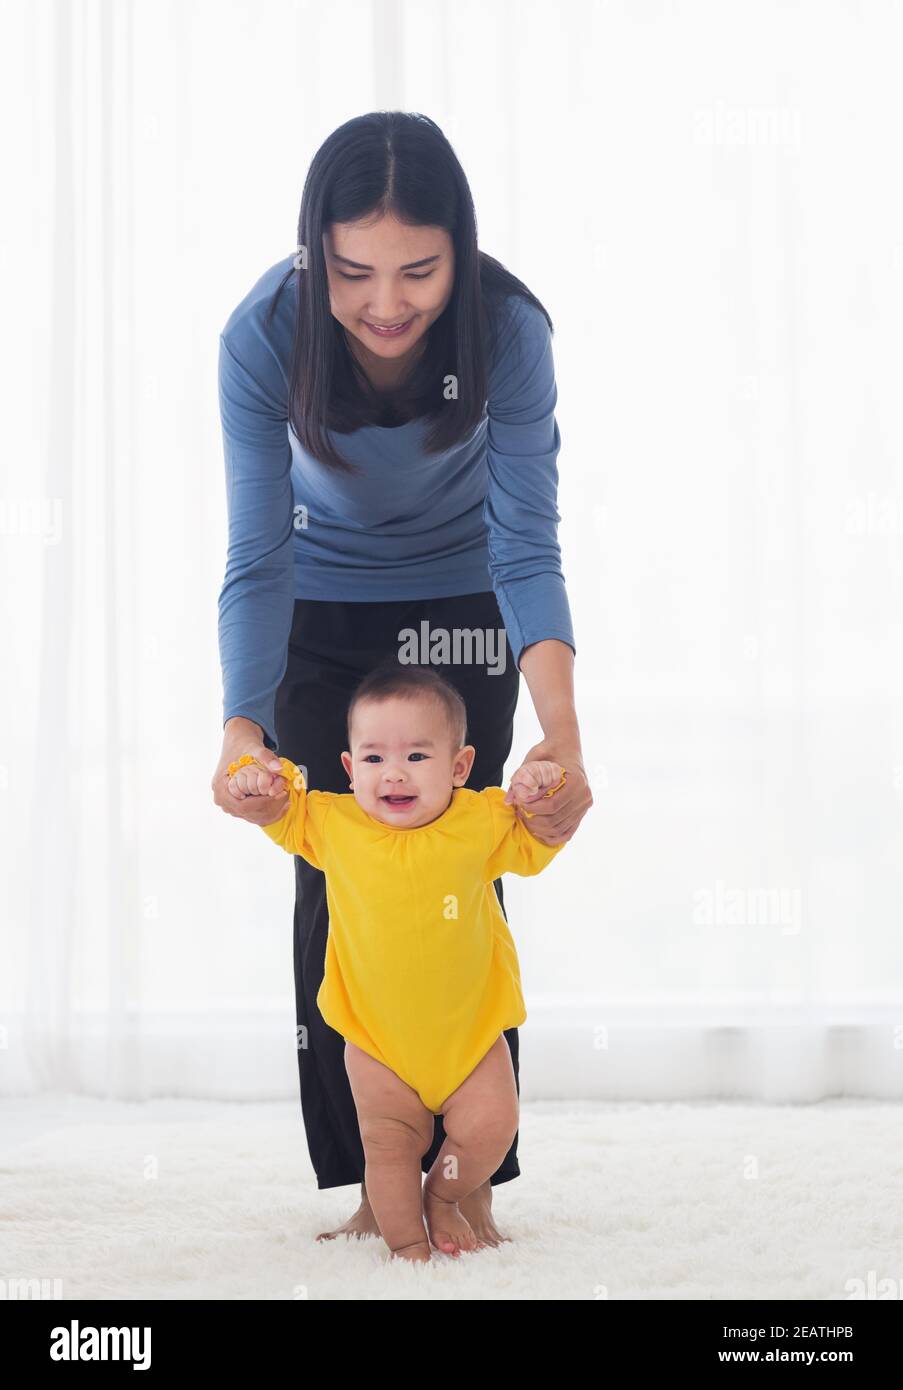 baby taking first steps learning to walk with mother Stock Photo